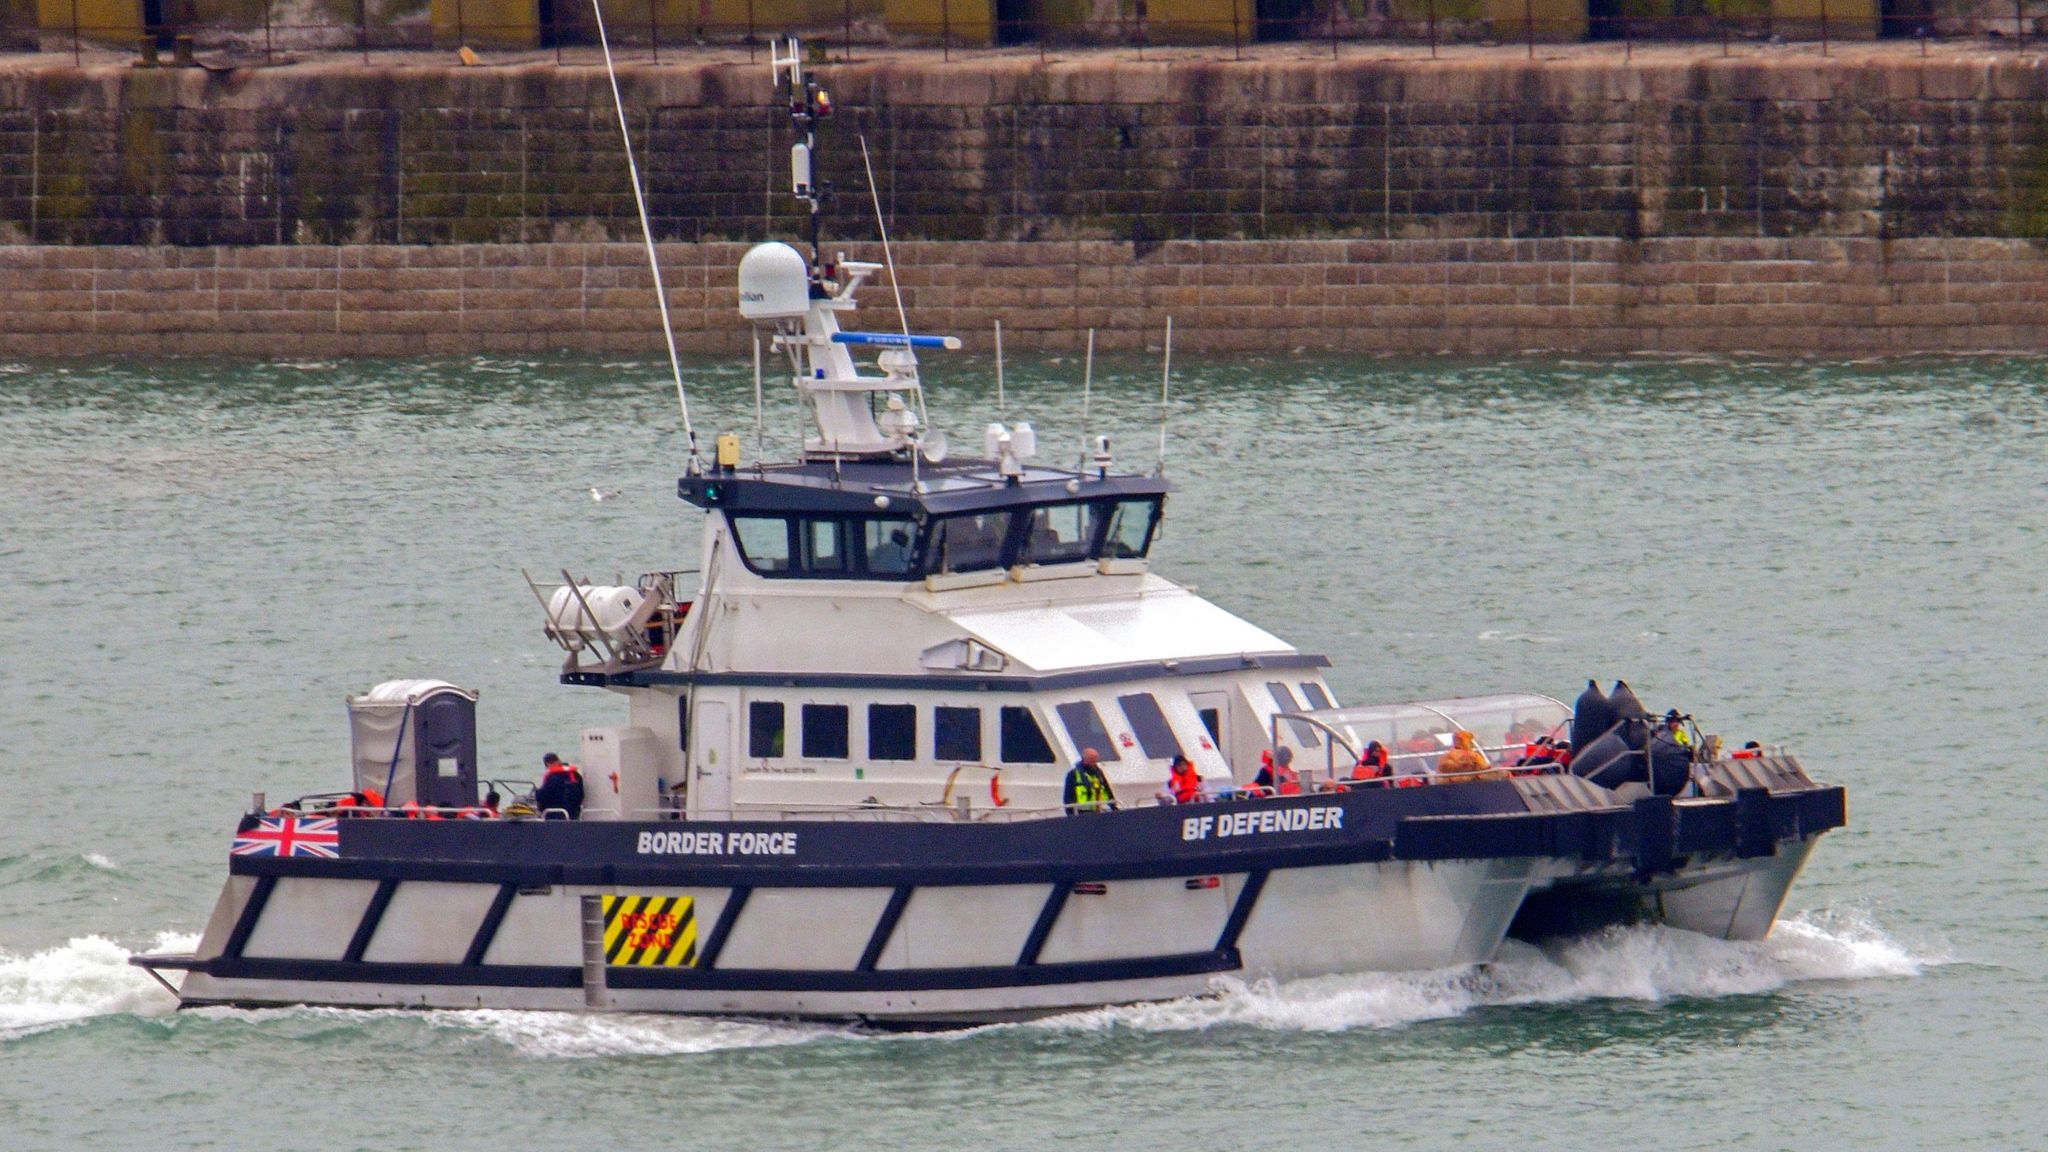 A border force boat with people on it